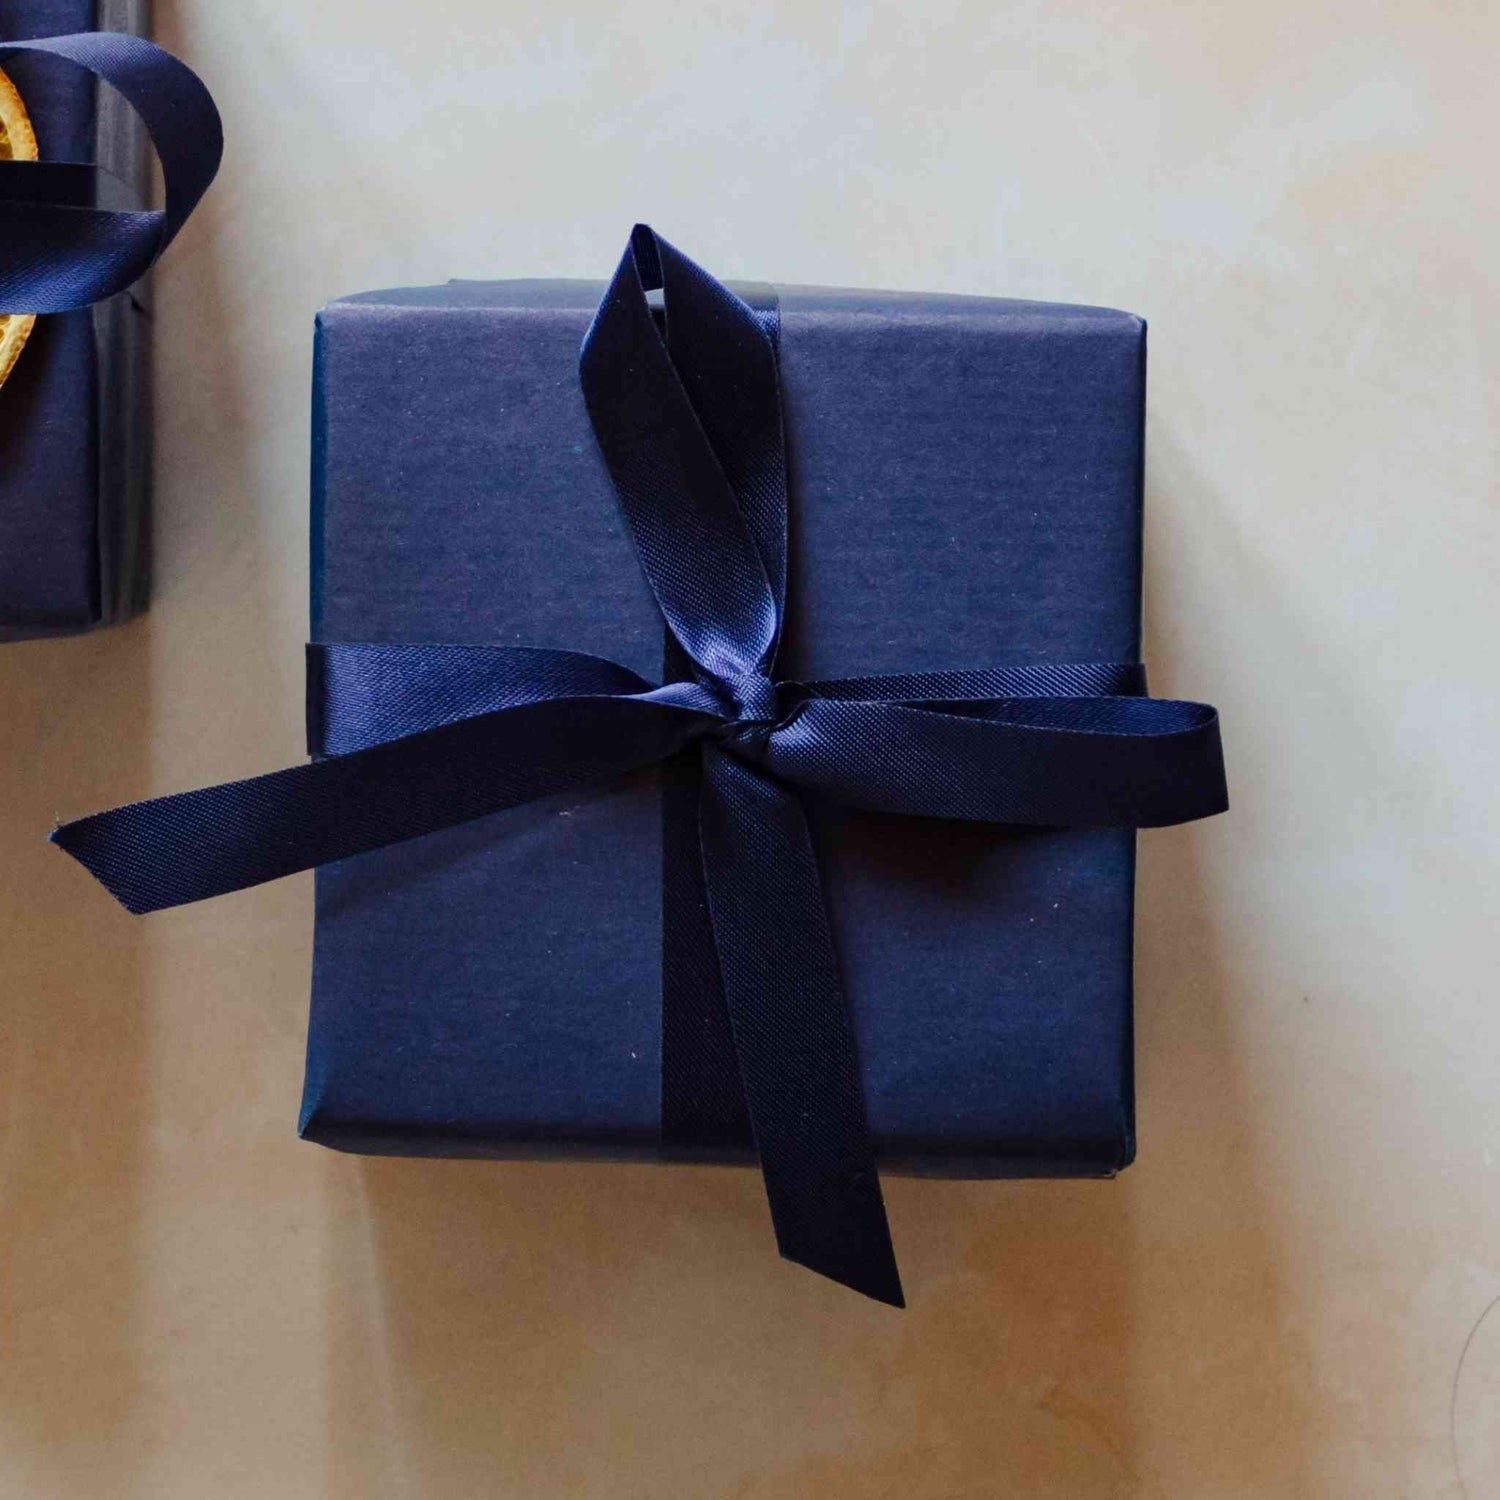 A 200g sweet soy candle from the Home County Co. is shown with luxury Gift Wrap. The candle is wrapped in luxury navy wrapping paper secured with navy ribbon.